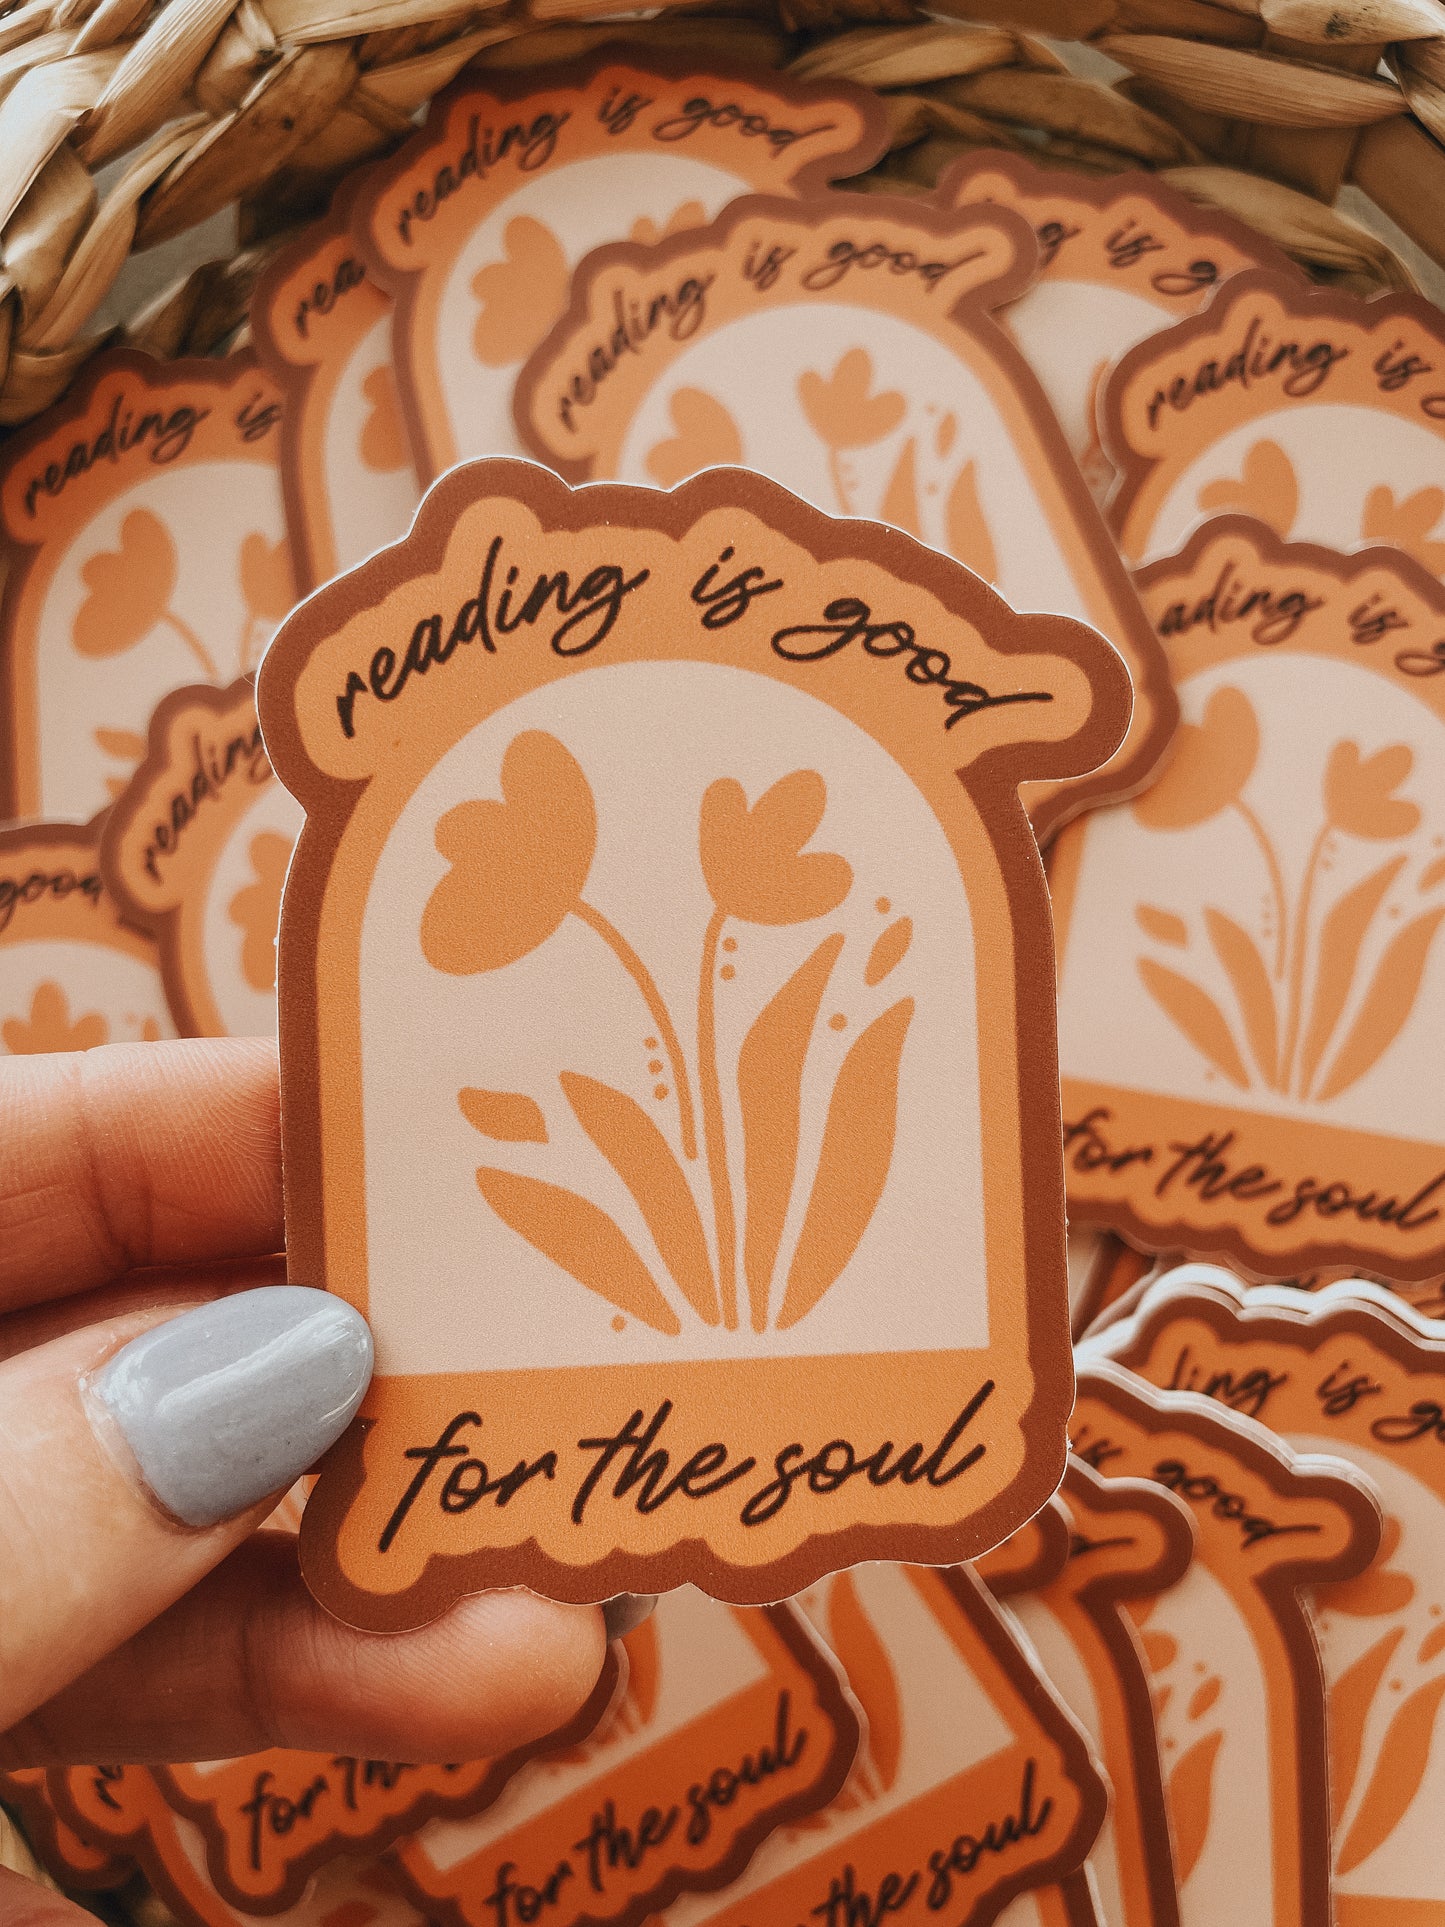 Reading is good for the soul | Sticker